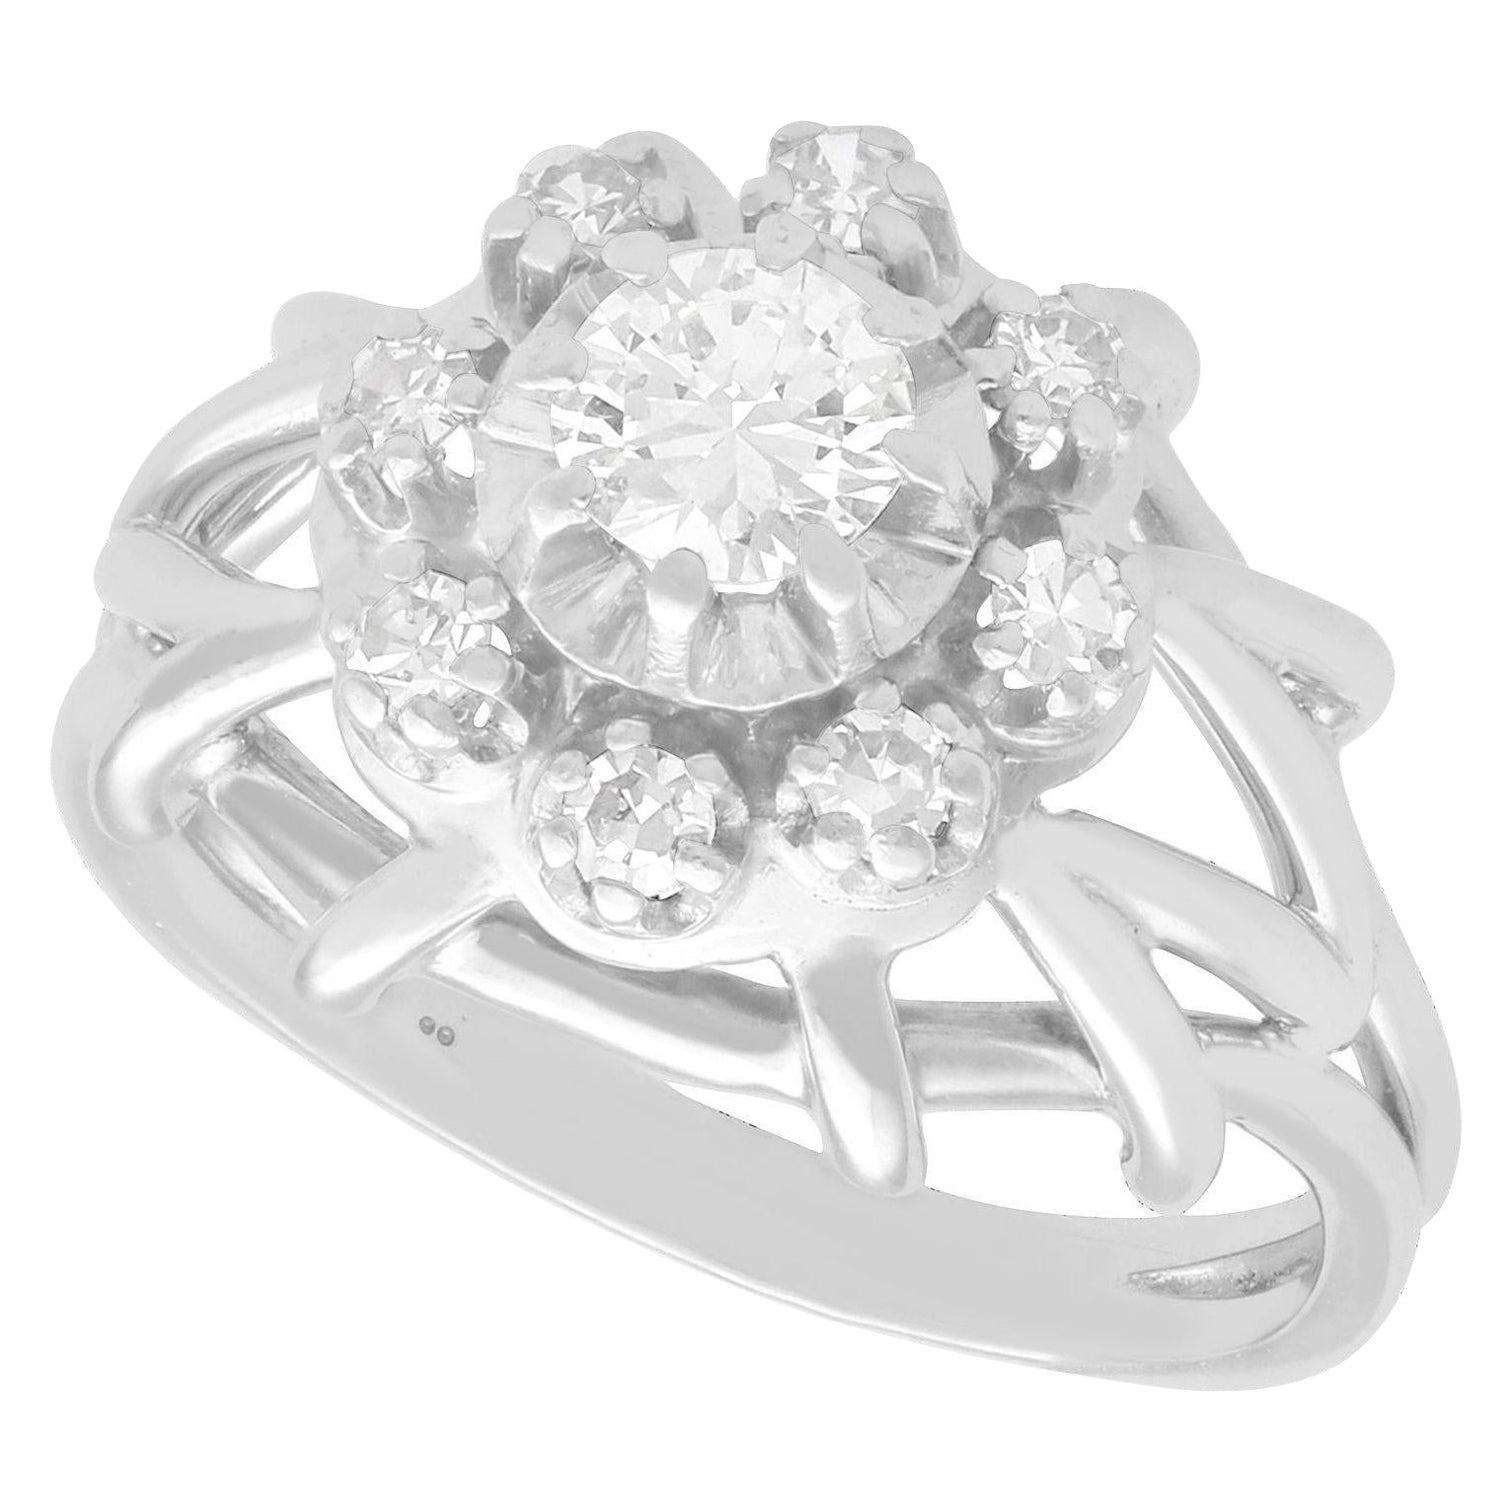 Antique Diamond and White Gold Cluster Engagement Ring, circa 1935